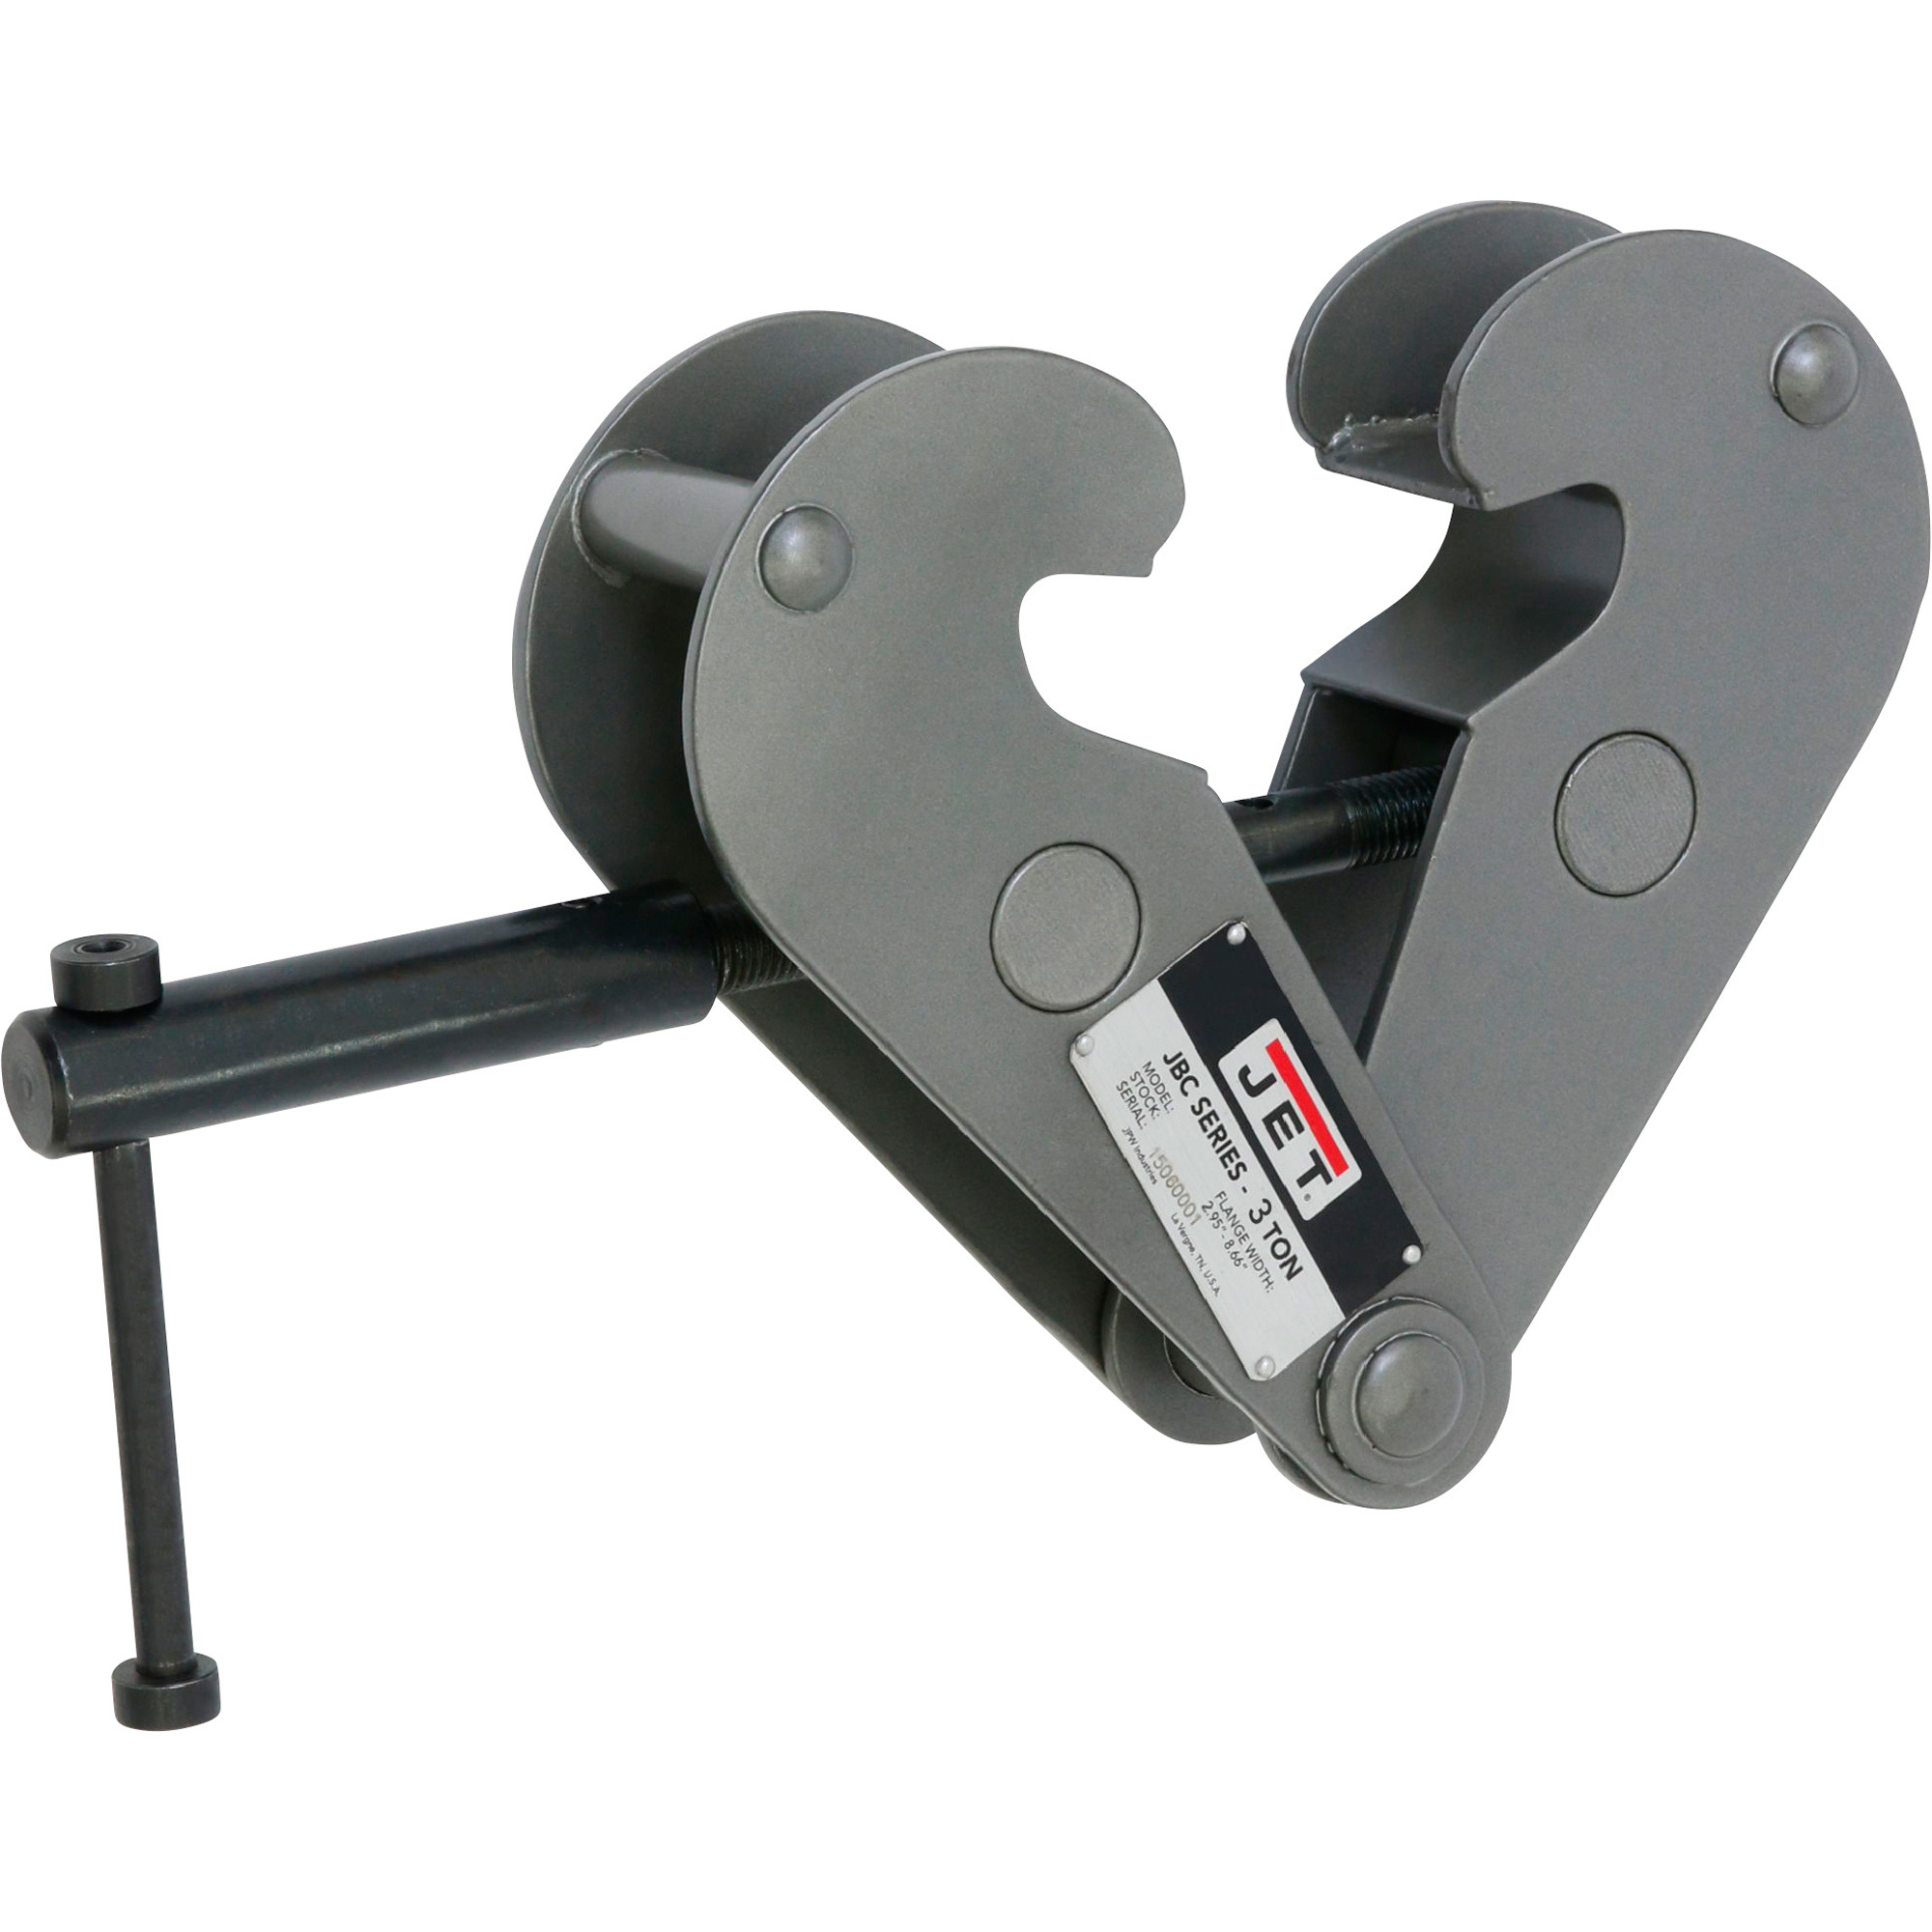 JET Beam Clamp, 3-Ton, Fits Beam Up to 10 5/8Inch W, Model JBC-3